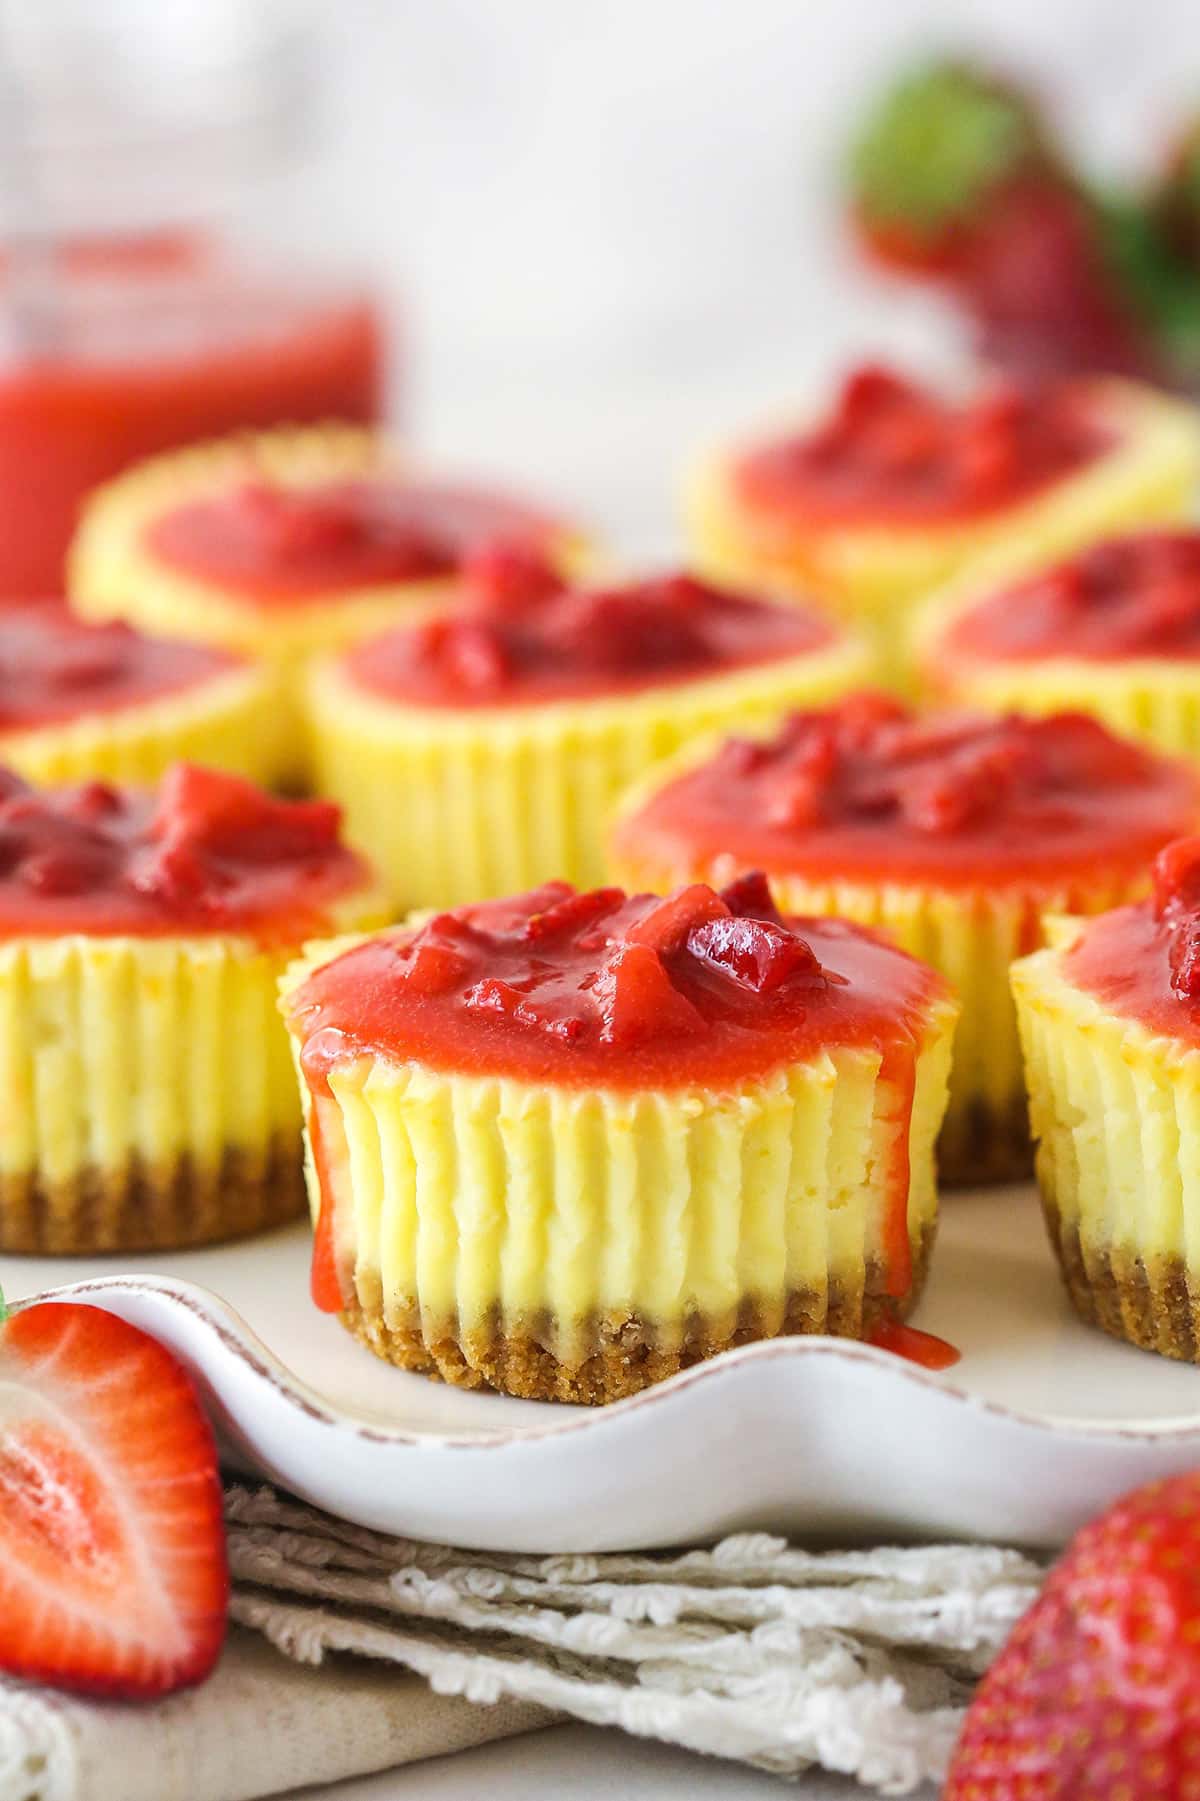 Mini strawberry cheesecakes on a serving platter.